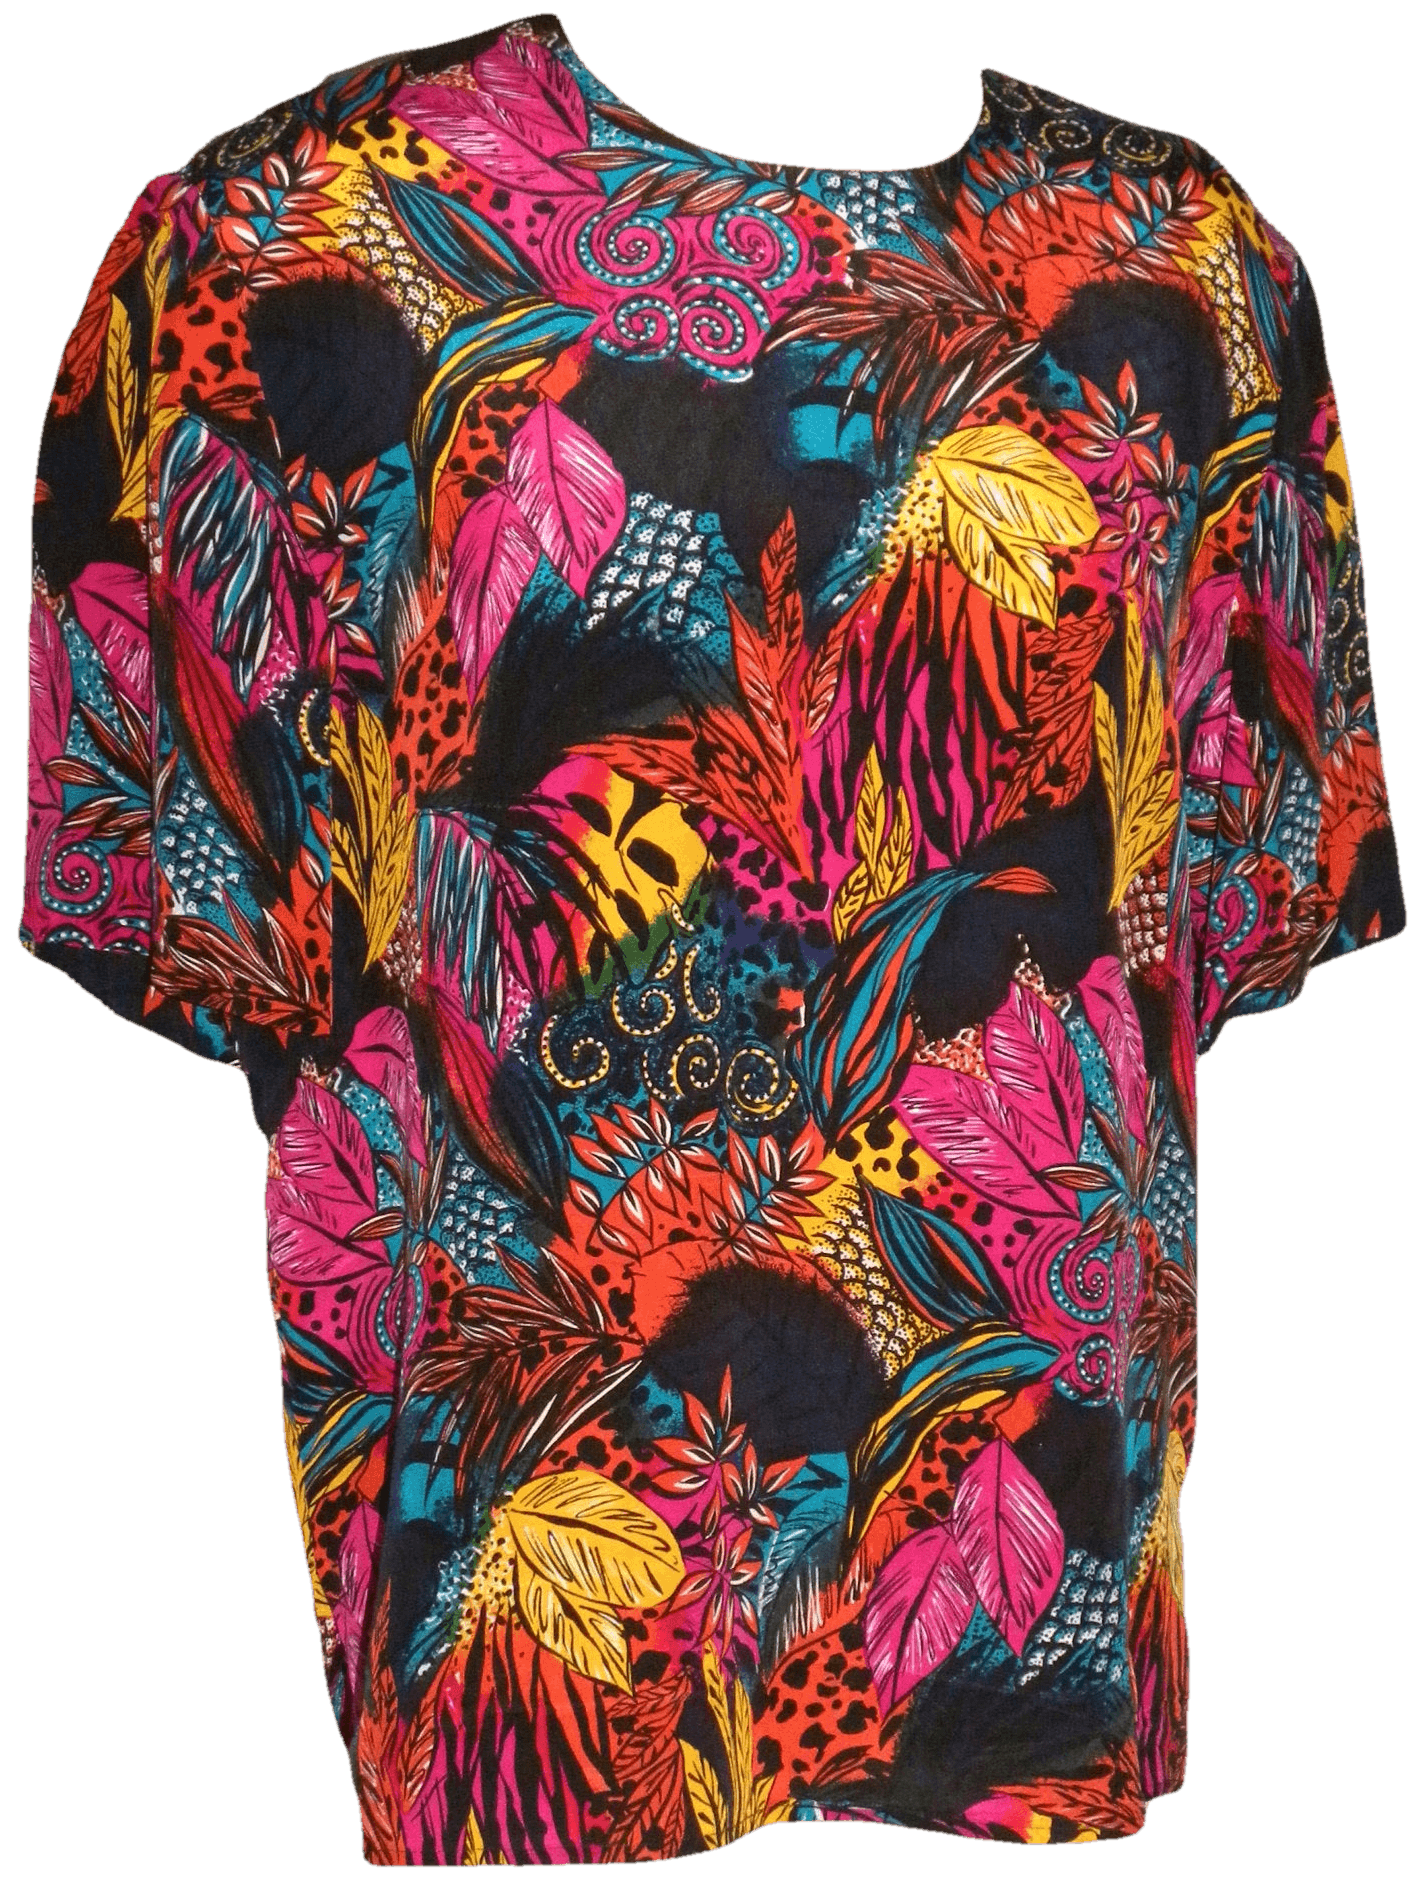 Vintage 80s/90s Bright Floral Painterly Print Silk Blouse | Shop THRILLING